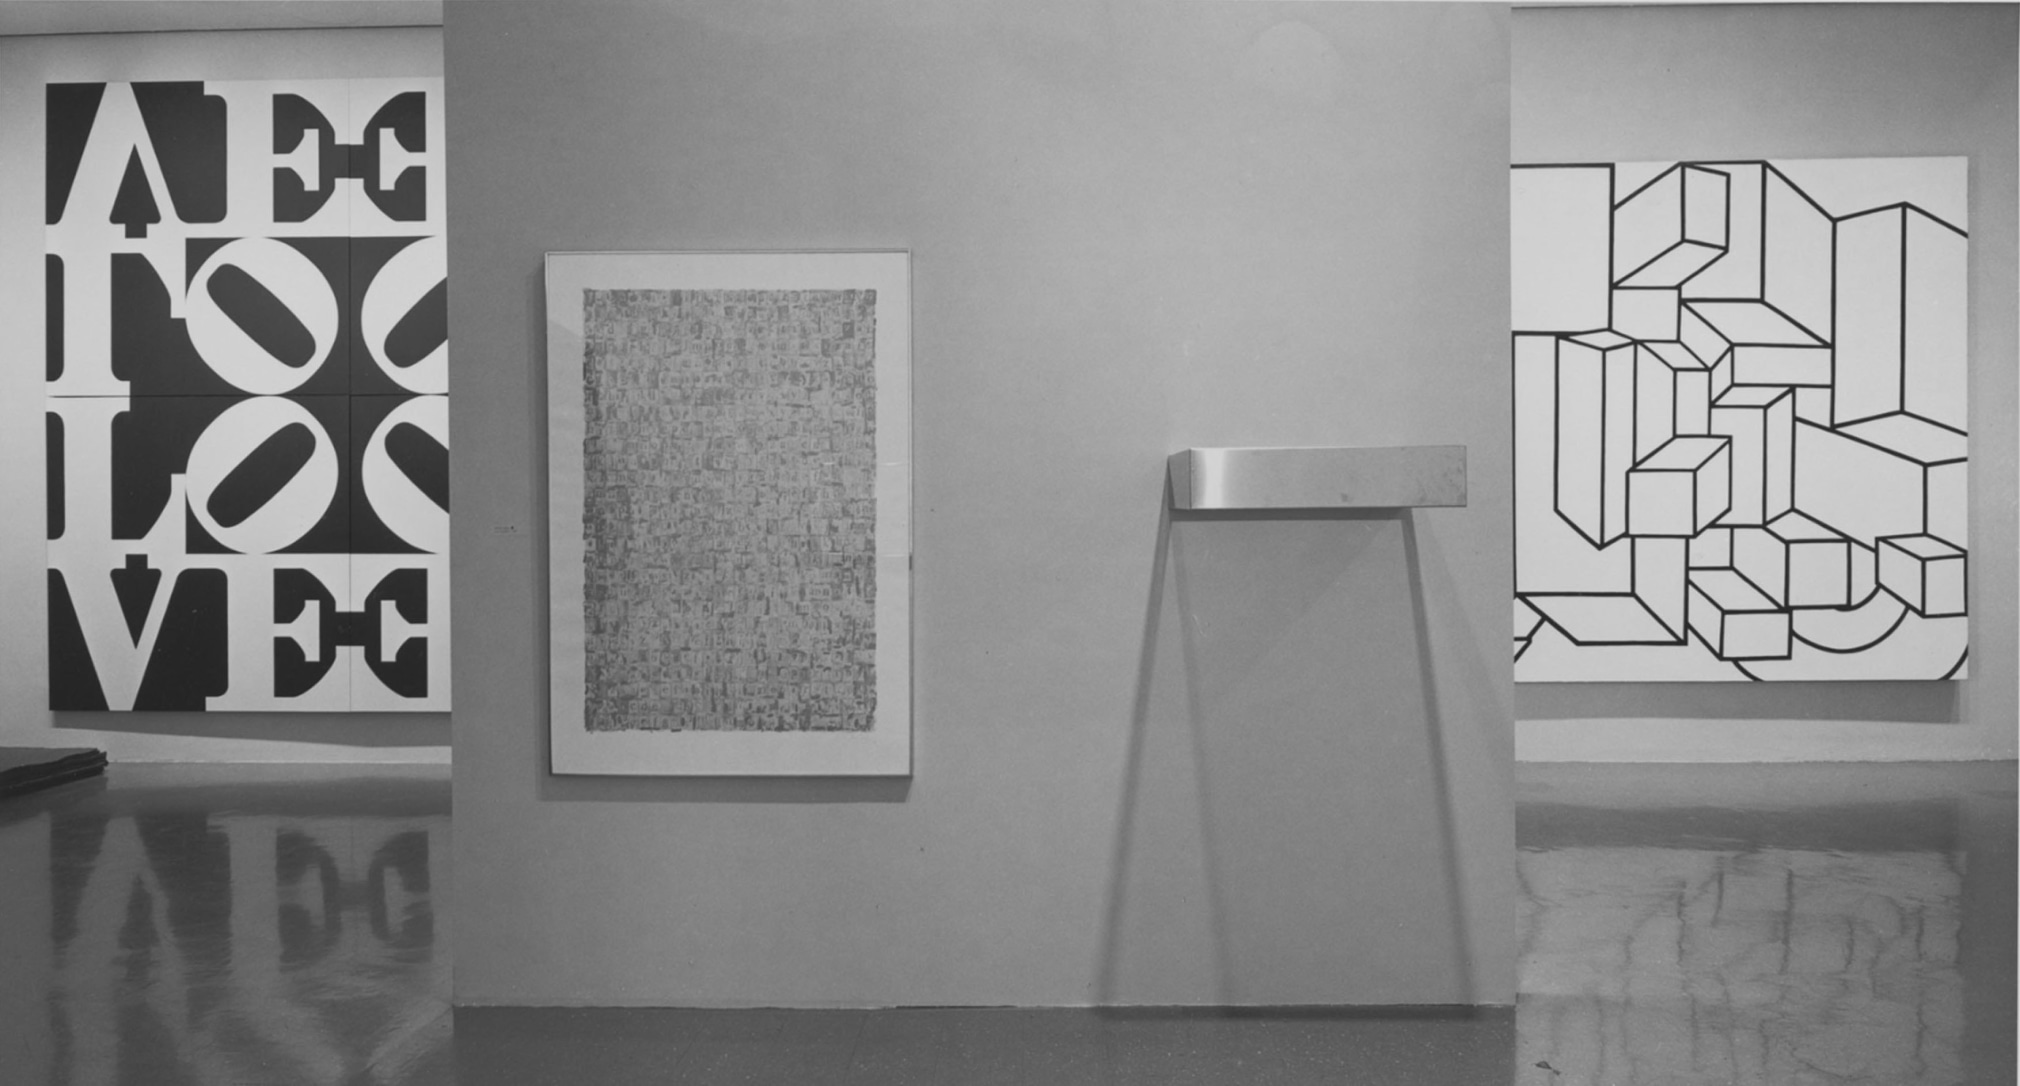 Installation view of the exhibition&nbsp;In Honor of Dr. Martin Luther King, Jr.&nbsp;at the Museum of Modern Art, New York, 1968; left to right, Indiana&rsquo;s Love Rising (The Black and White Love), and works by Jasper Johns, Donald Judd, and Al Held, &nbsp;